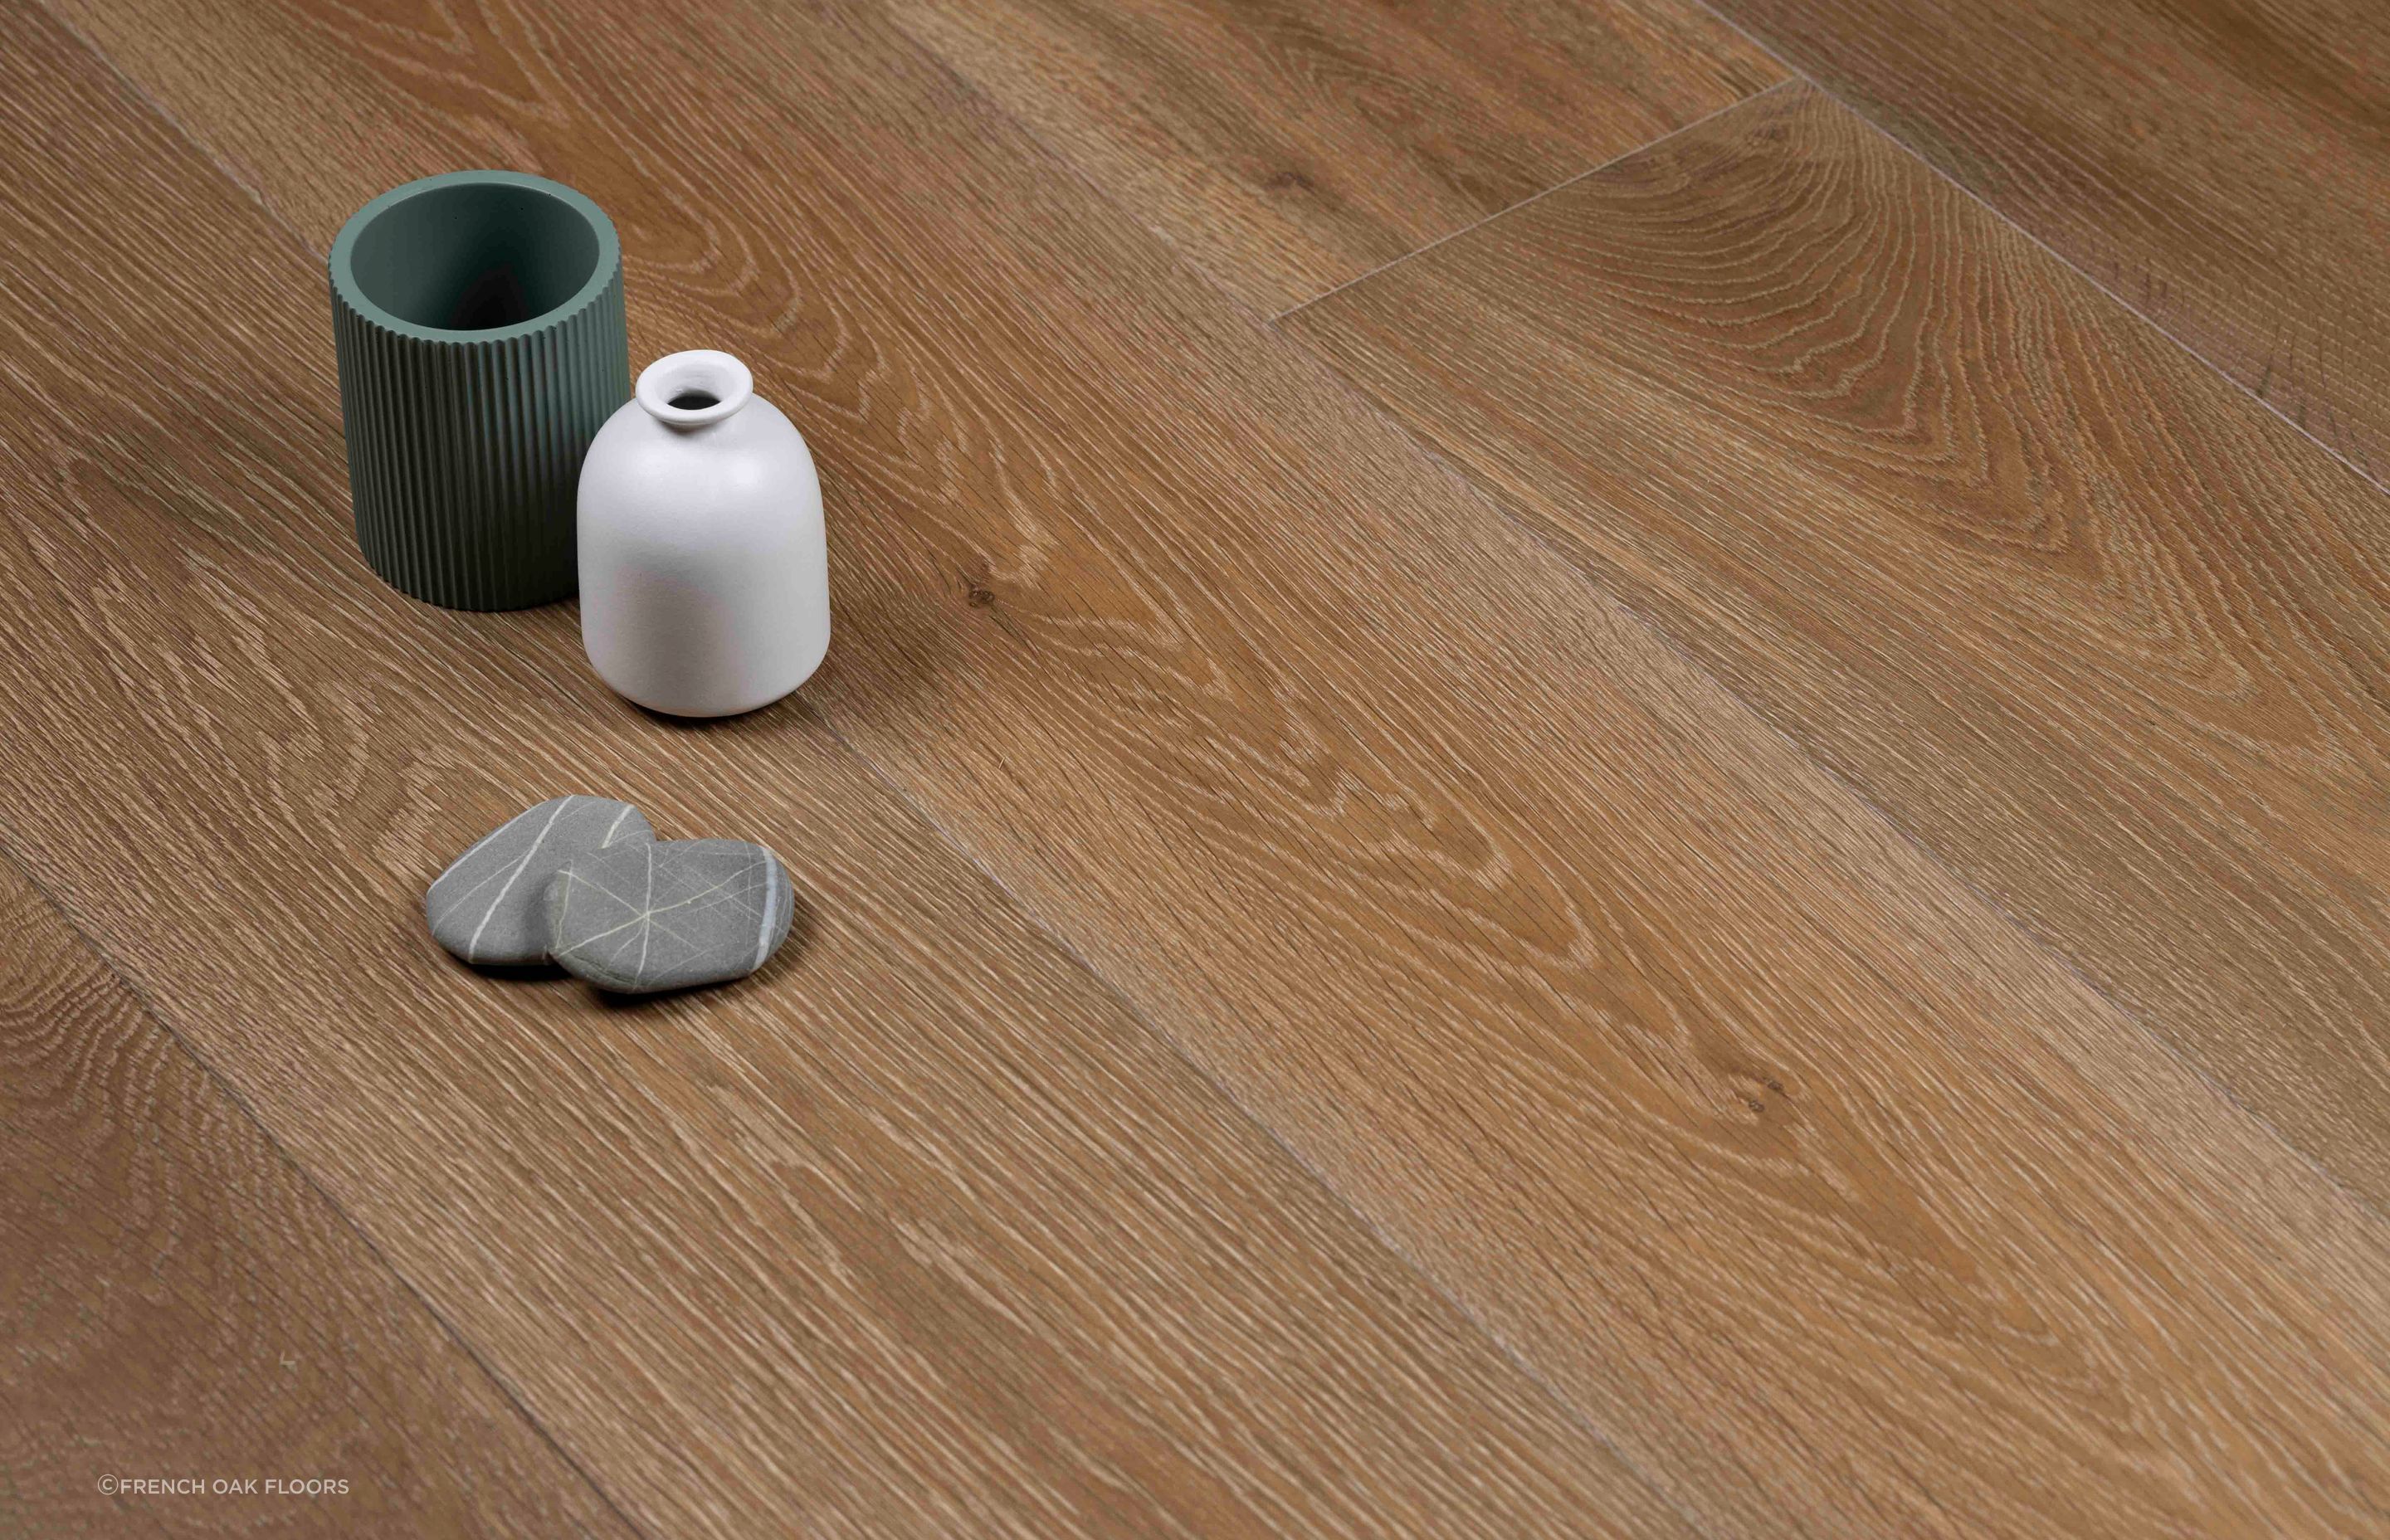 Warm, light browns are another popular tone for engineered floor boards.